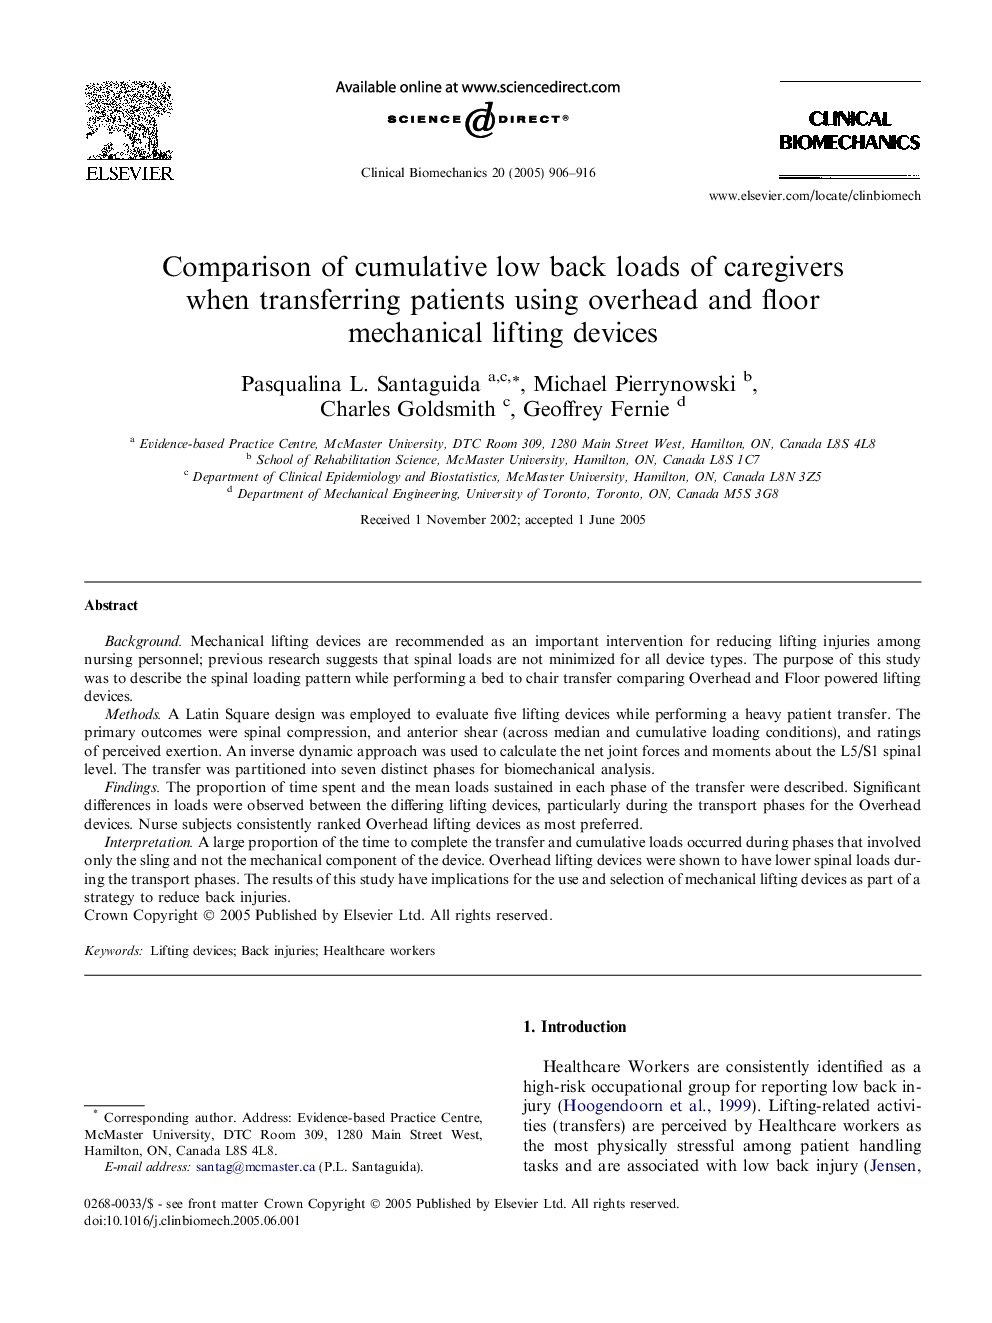 Comparison of cumulative low back loads of caregivers when transferring patients using overhead and floor mechanical lifting devices